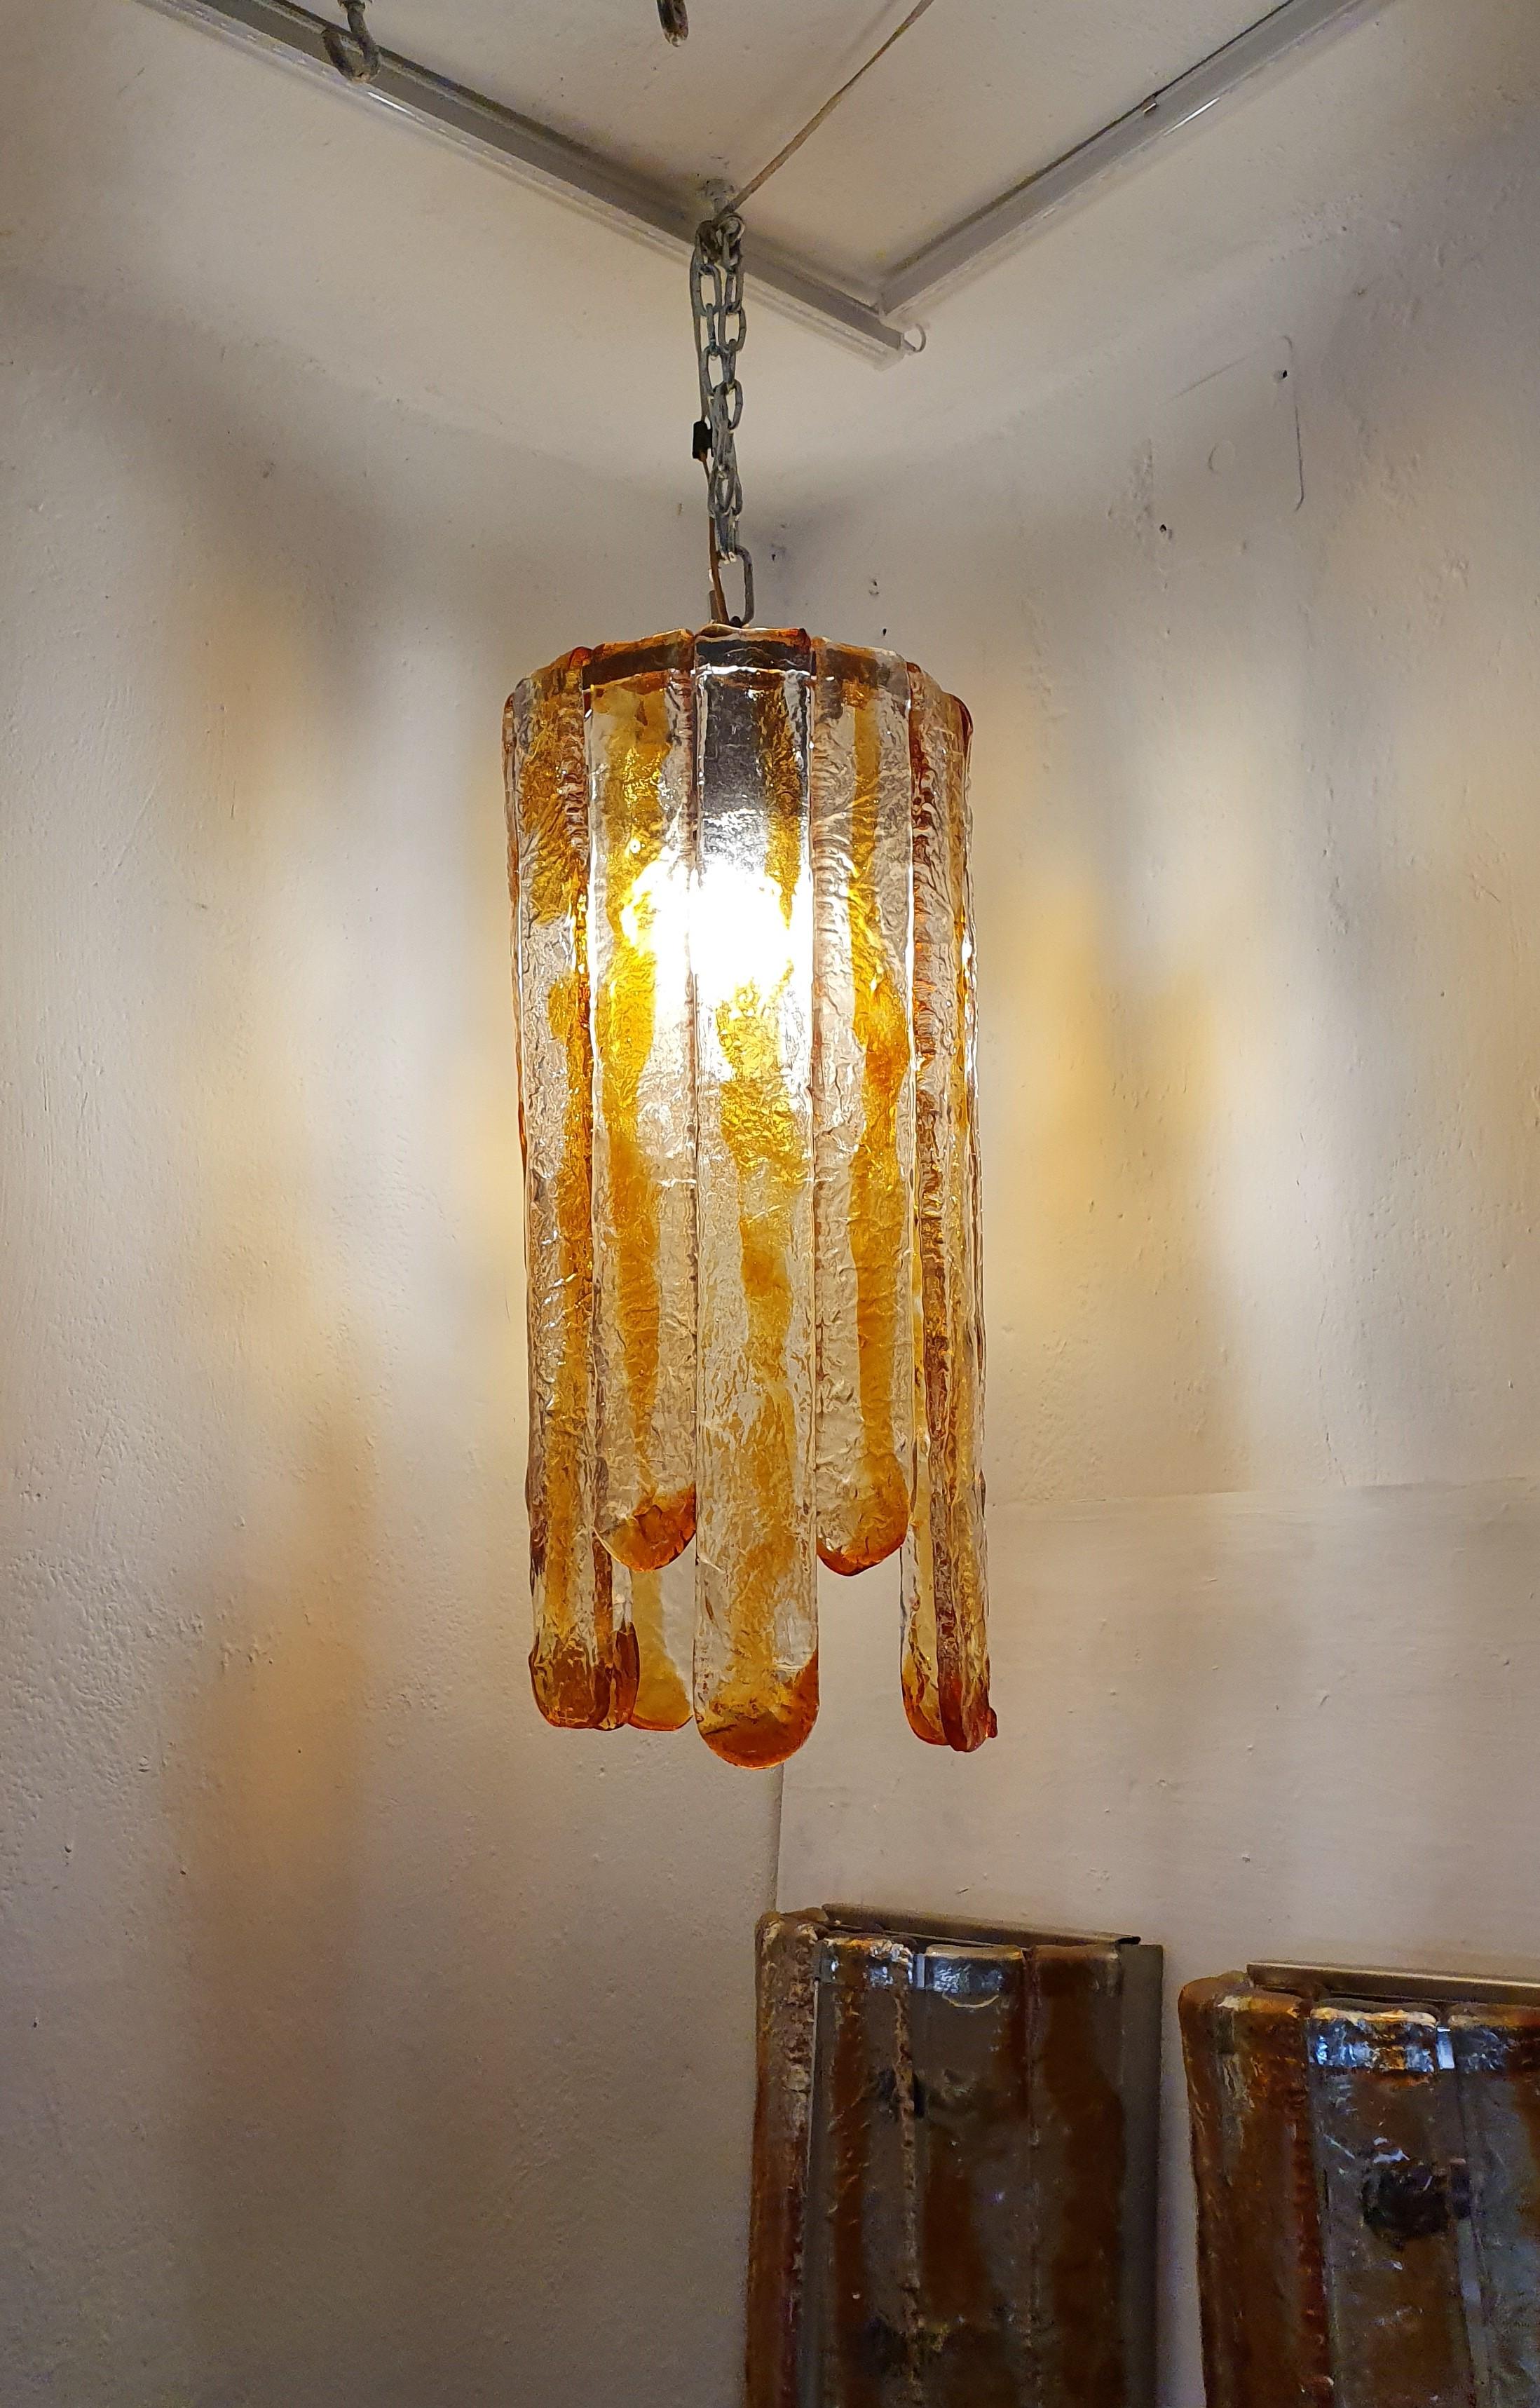 Mid-Century Modern one-light chandelier by Carlo Nason for Mazzega in clear and orange glass, consisting of two sizes of glass blades, and a steel hardware.
Italy, Murano, circa 1970.